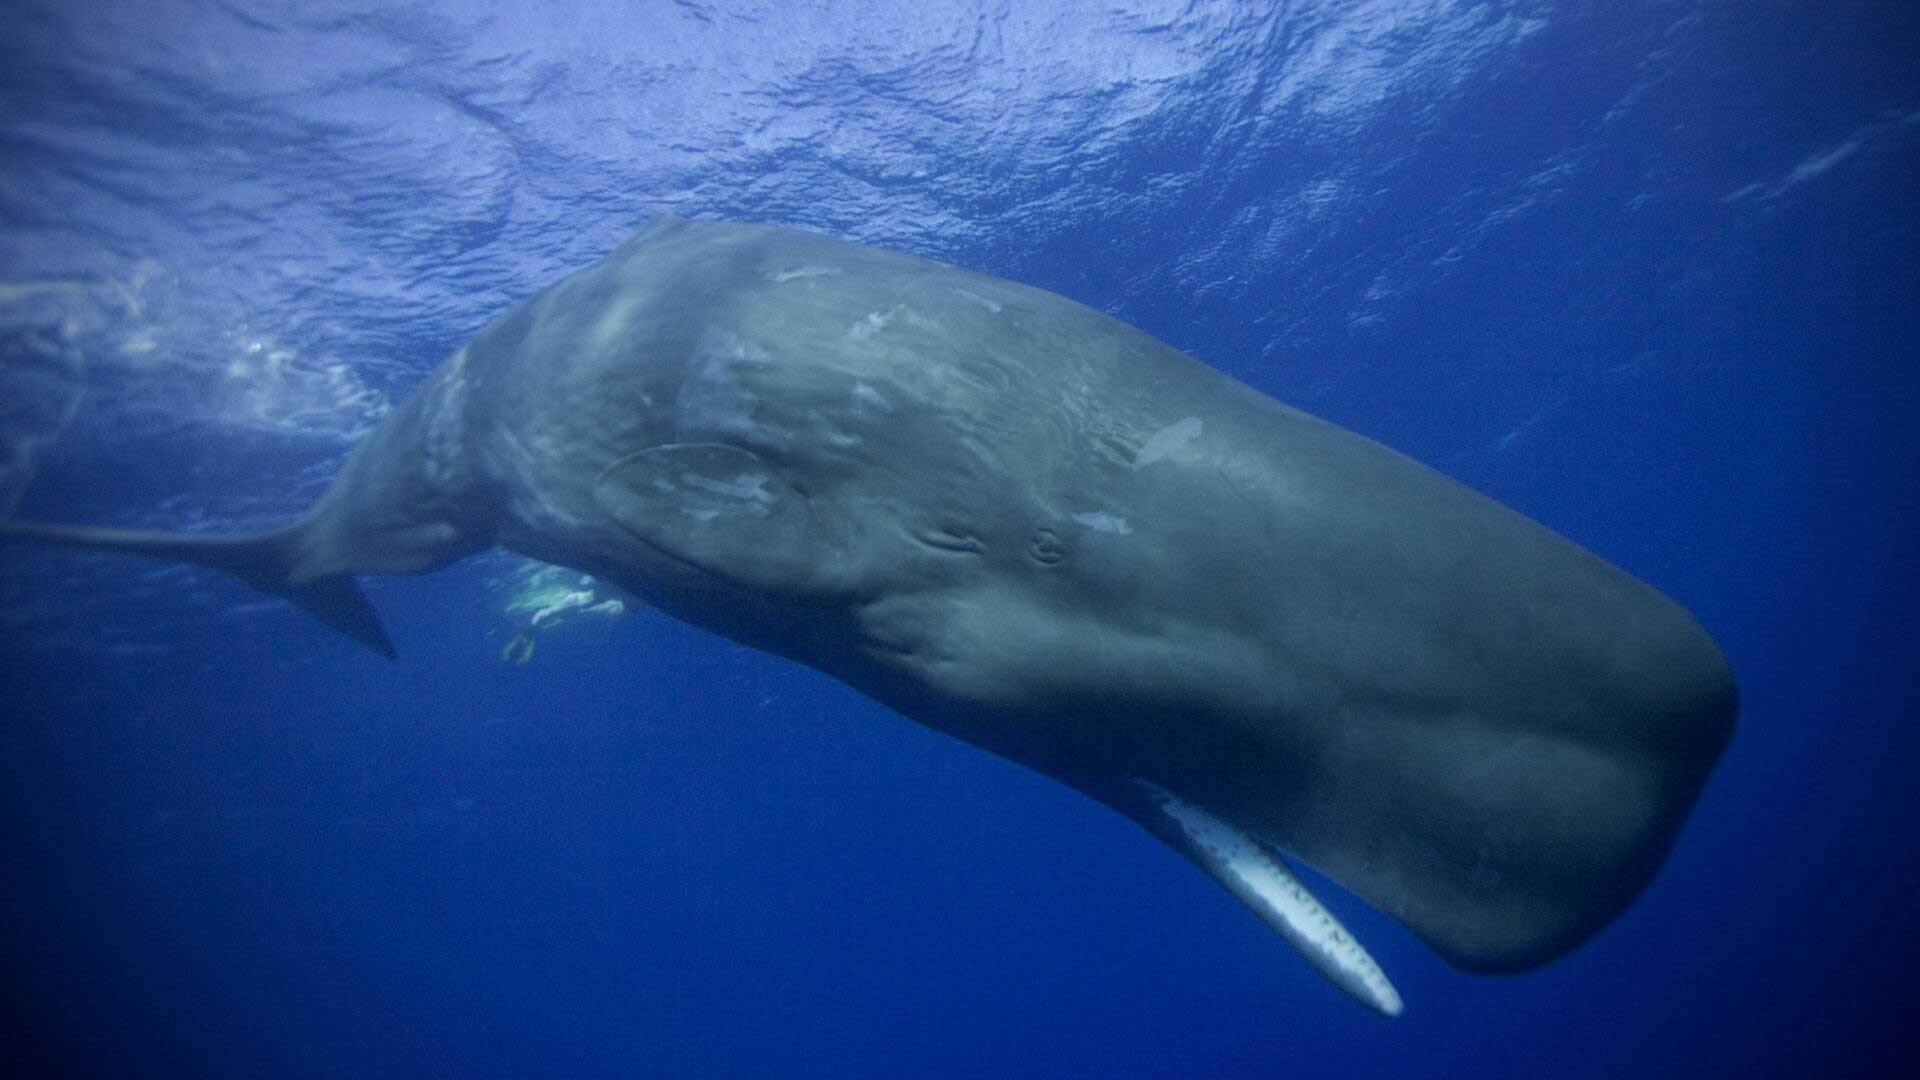 Sperm Whale Holidays & Whale Watching